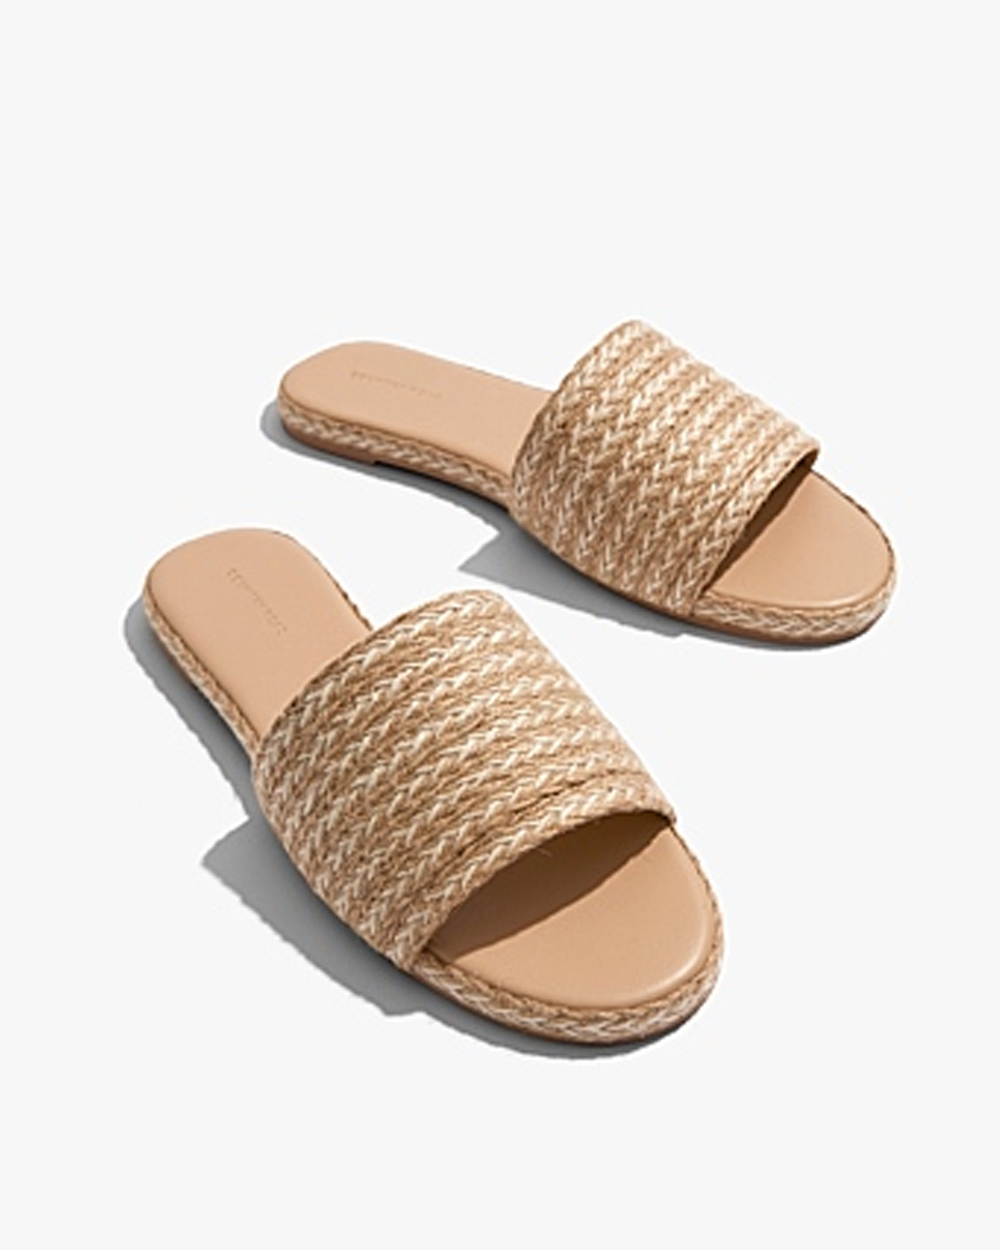 Woven slide, $109 from Country Road